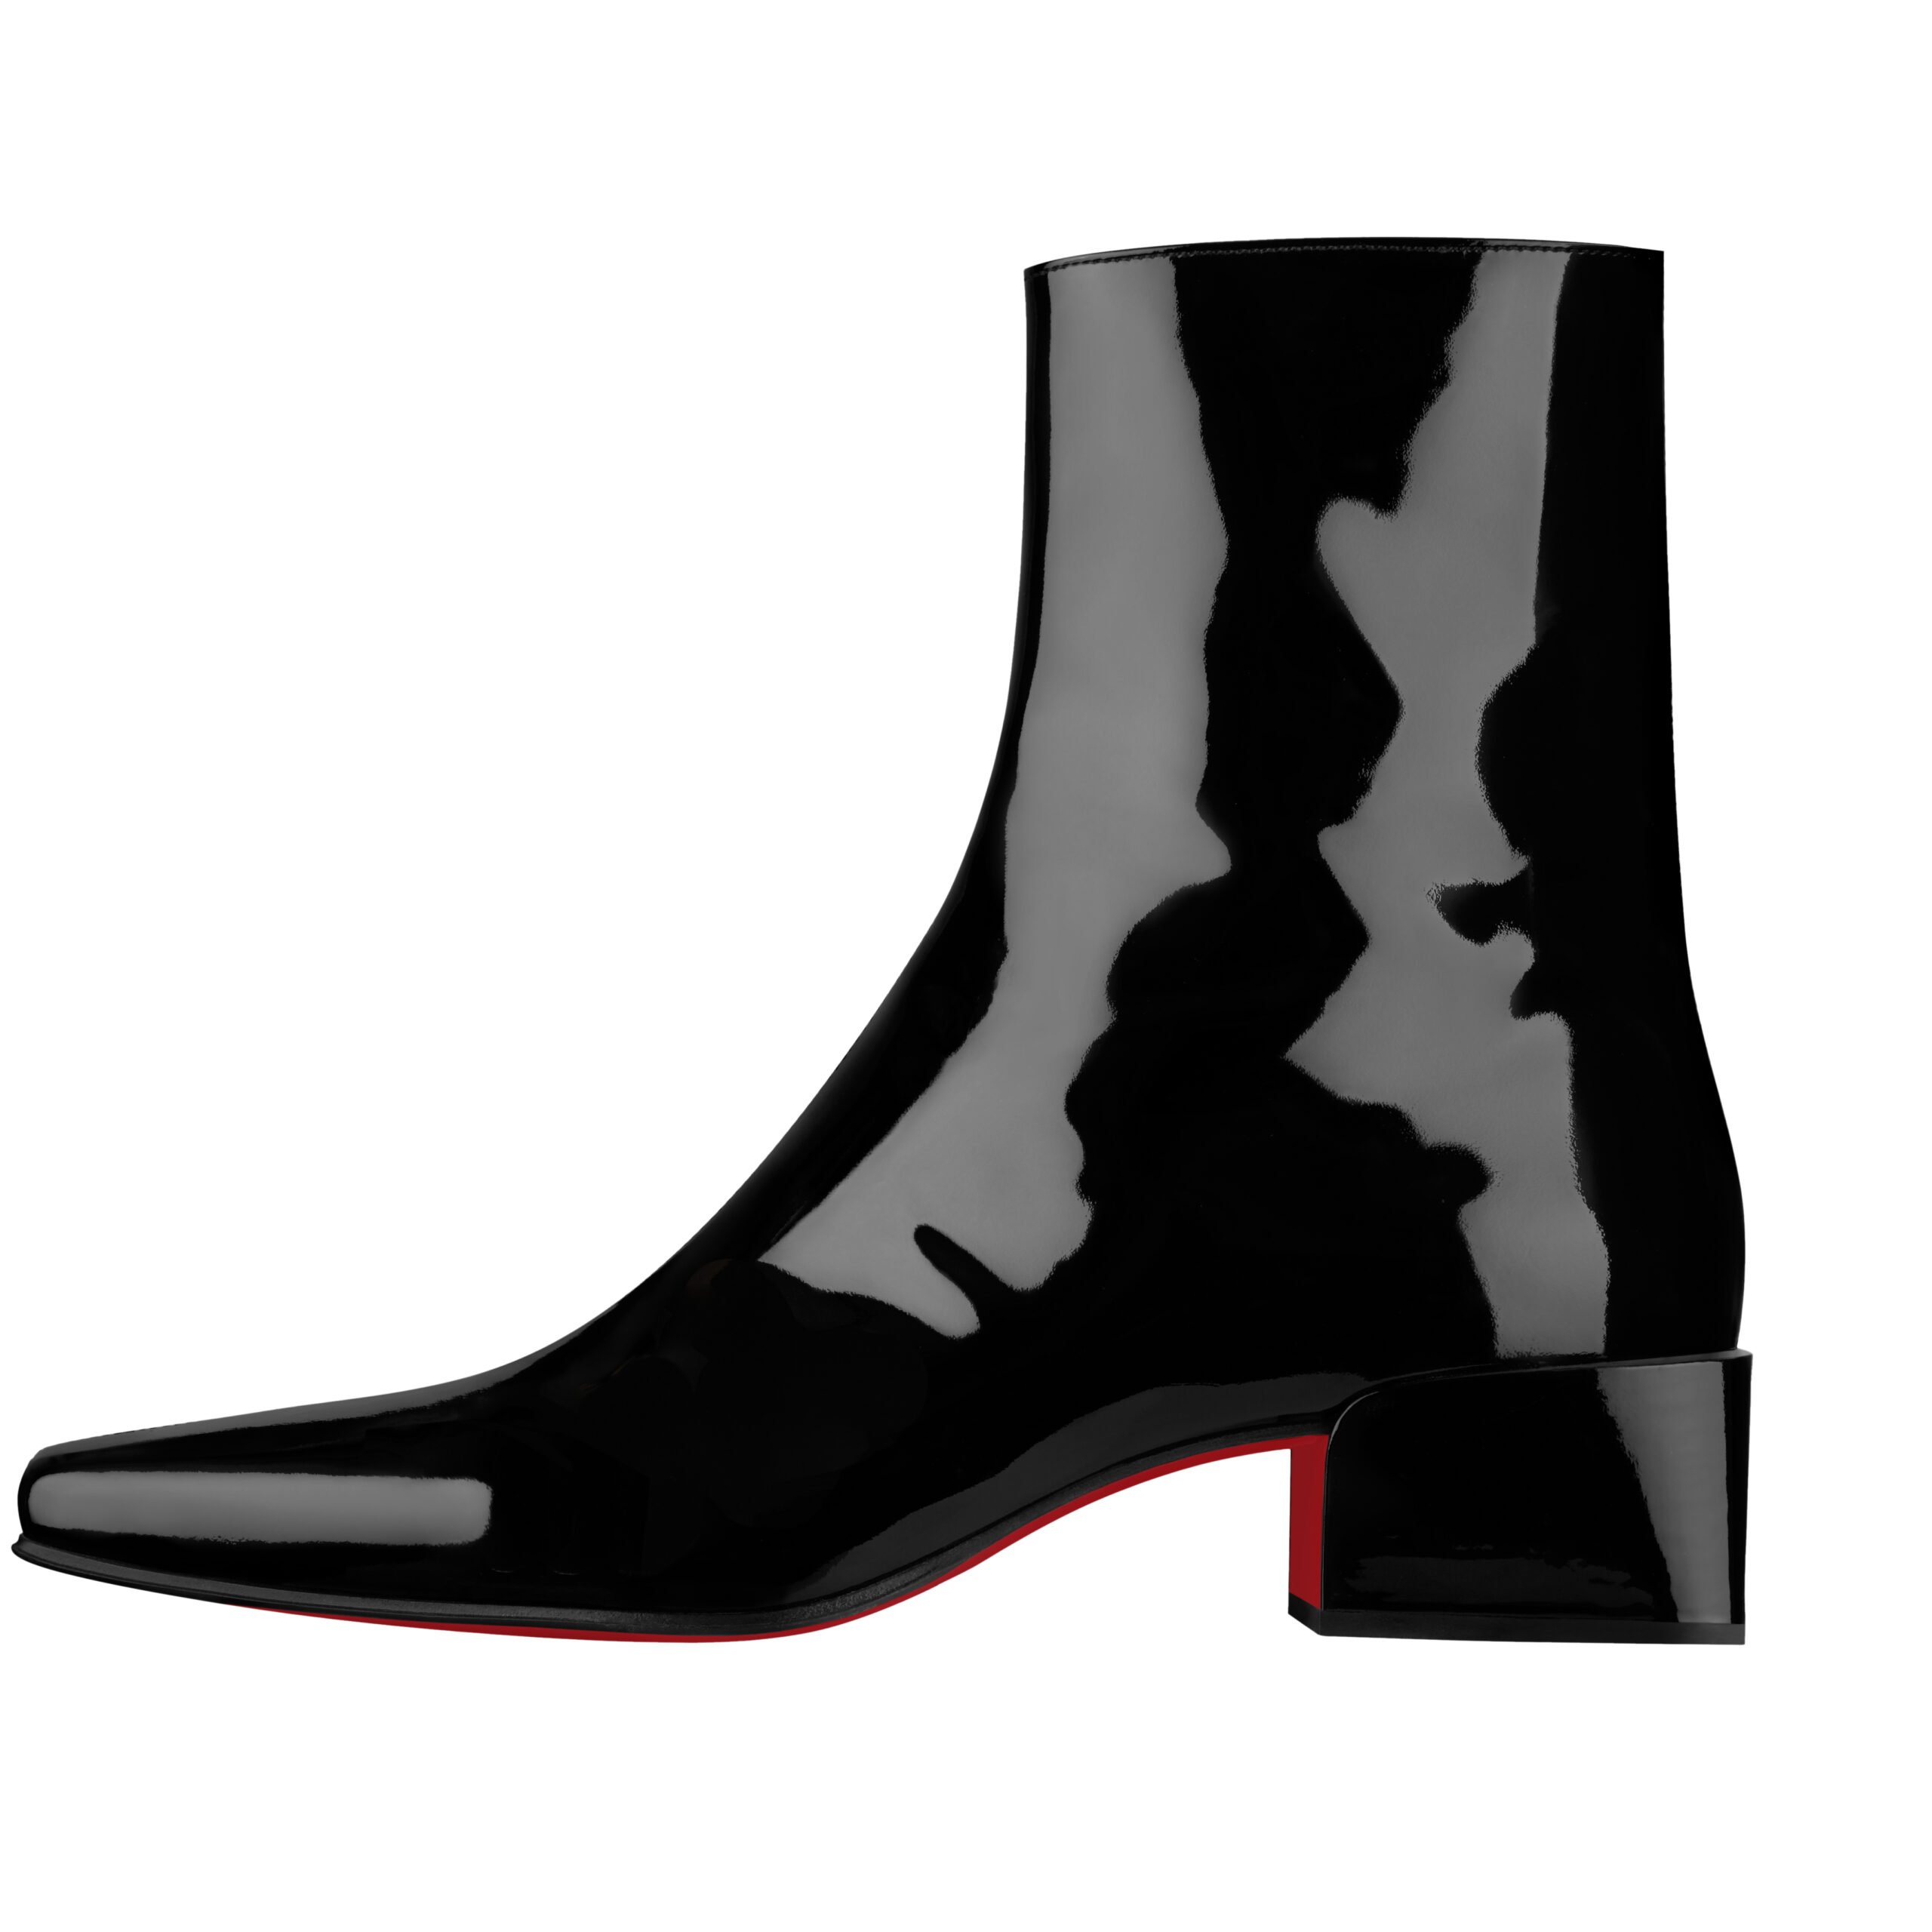 Alleo Boot Patent calf leather